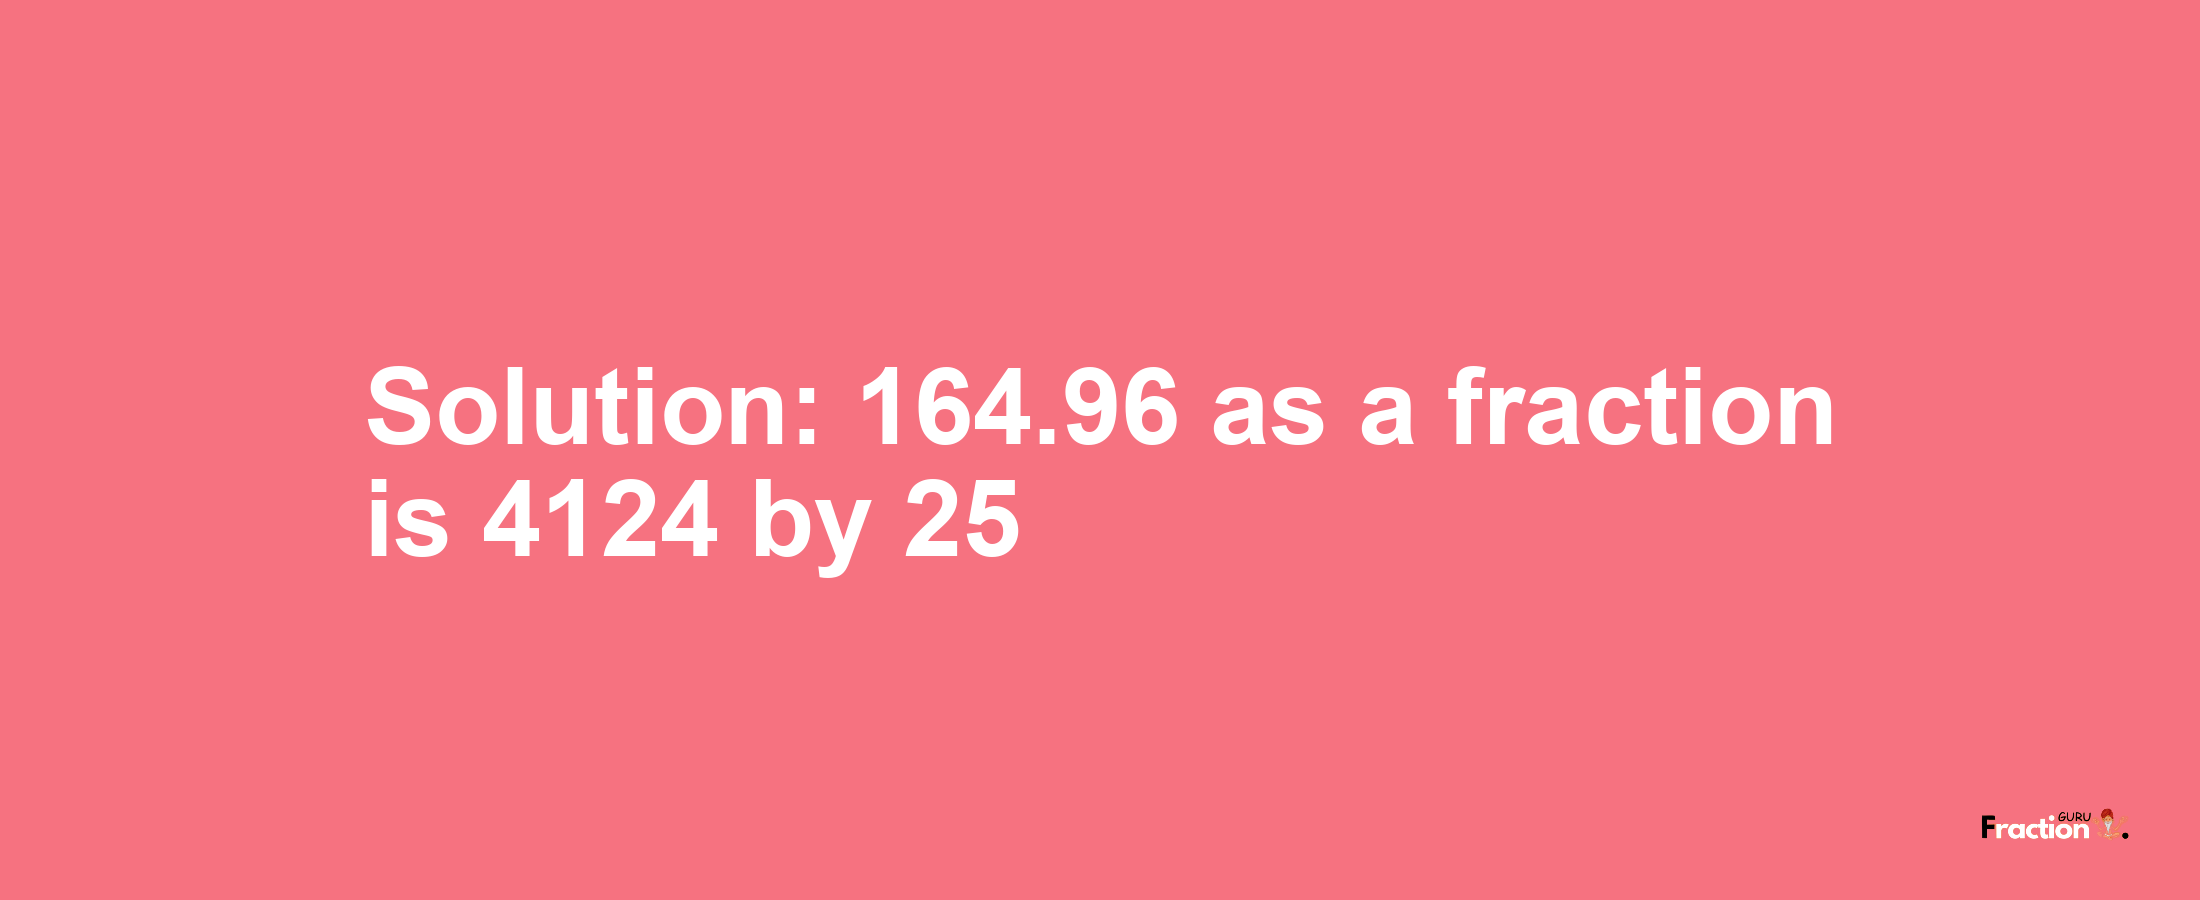 Solution:164.96 as a fraction is 4124/25